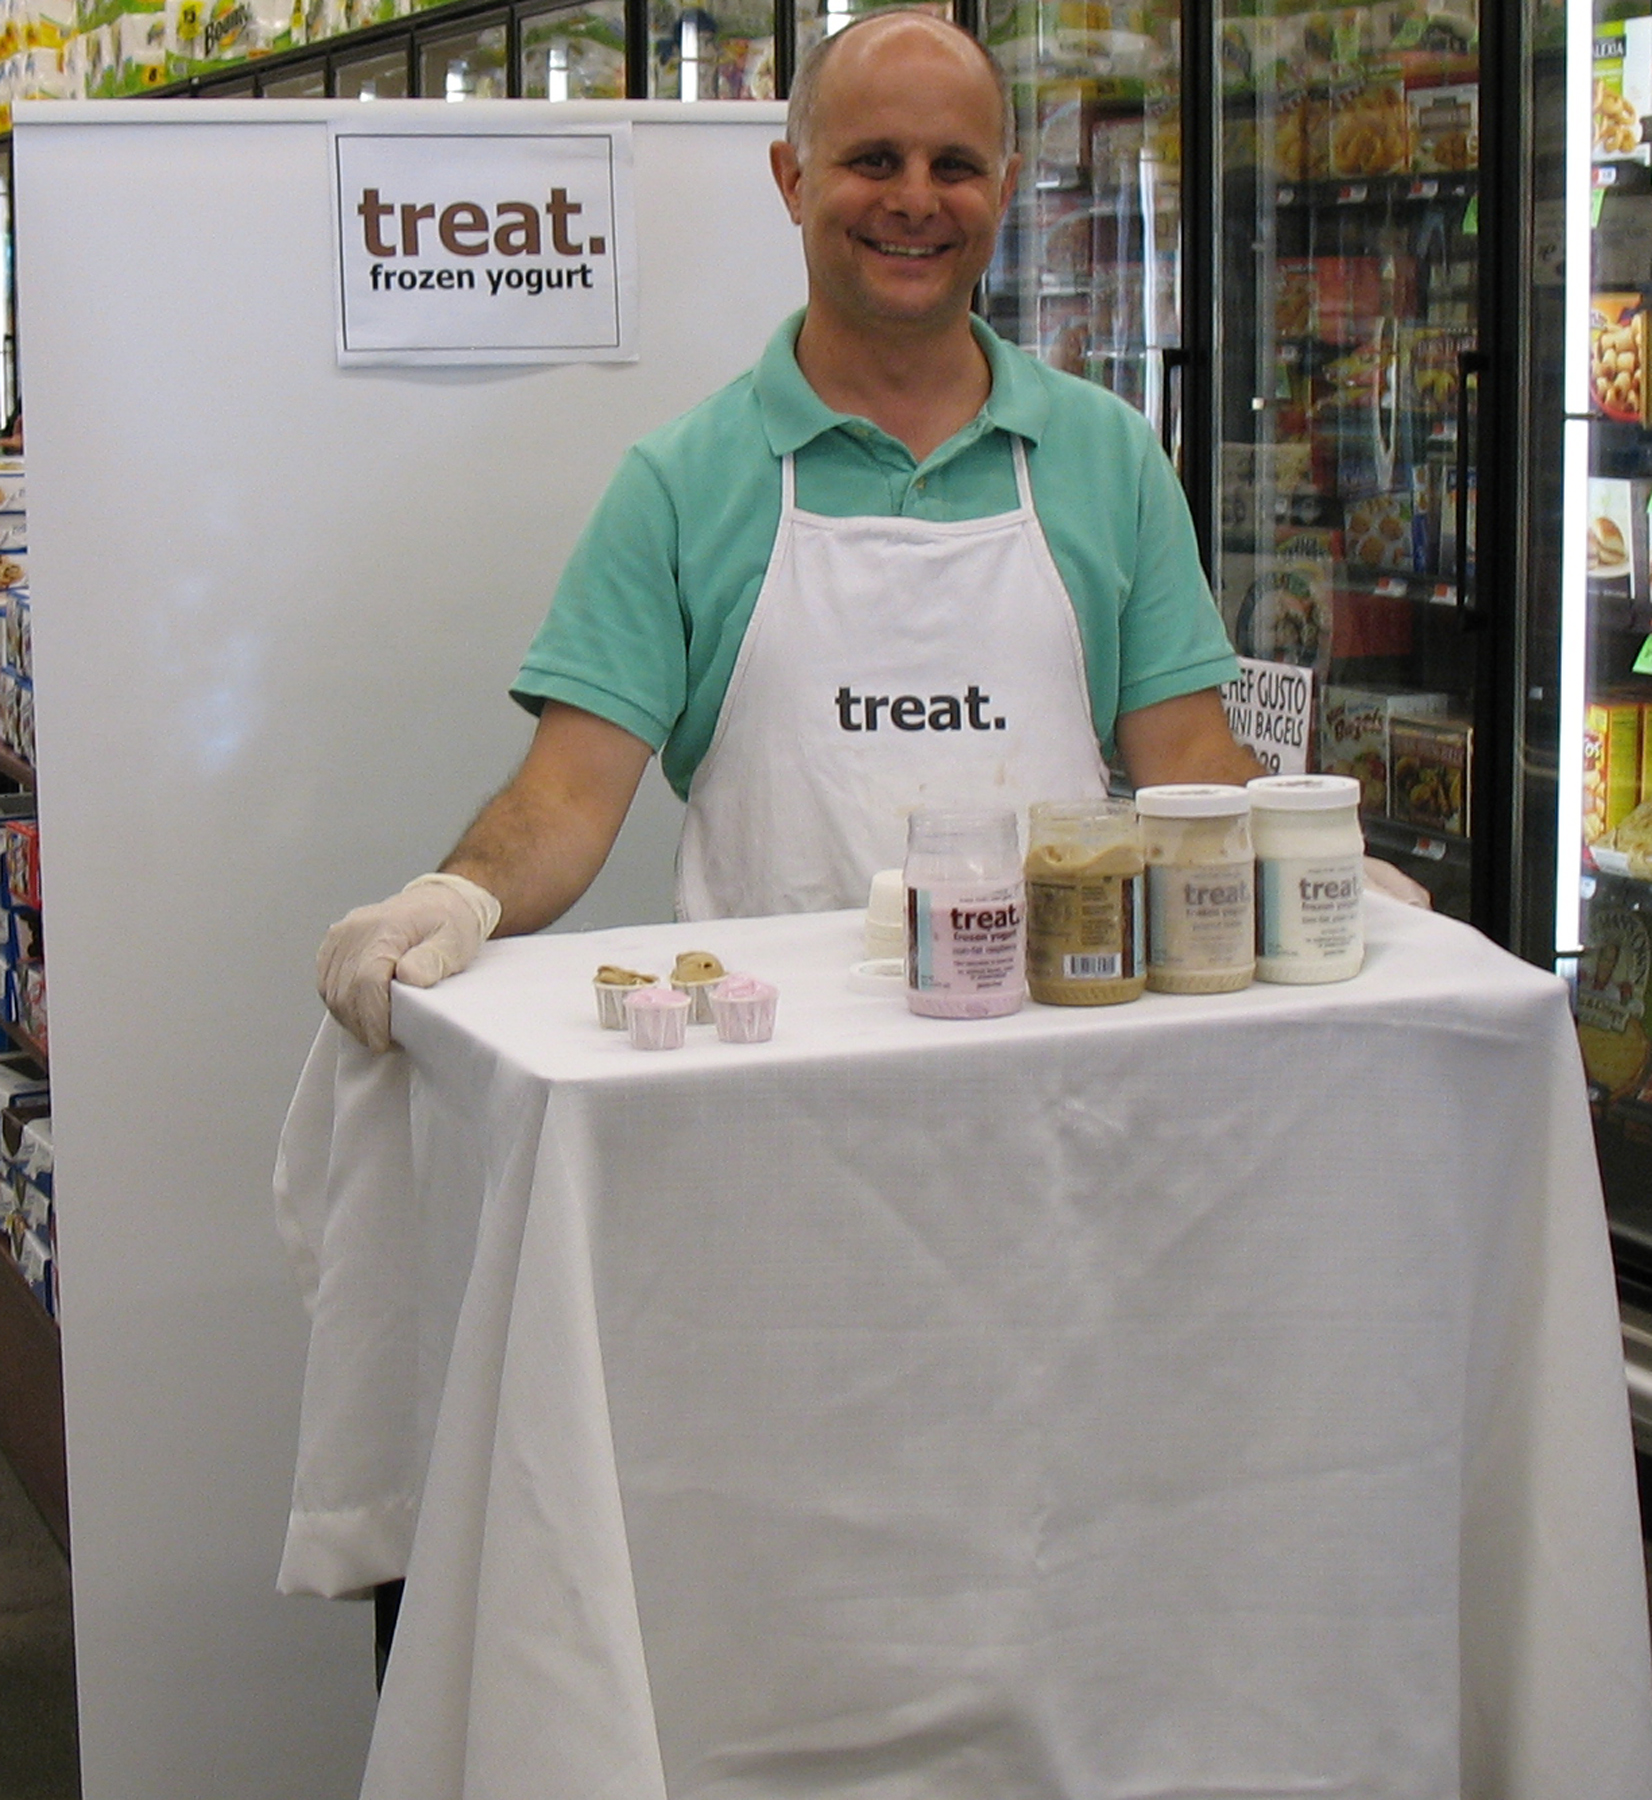 treat. frozen yogurt is produced in Cross River, NY, and sold at DeCicco Family Markets.